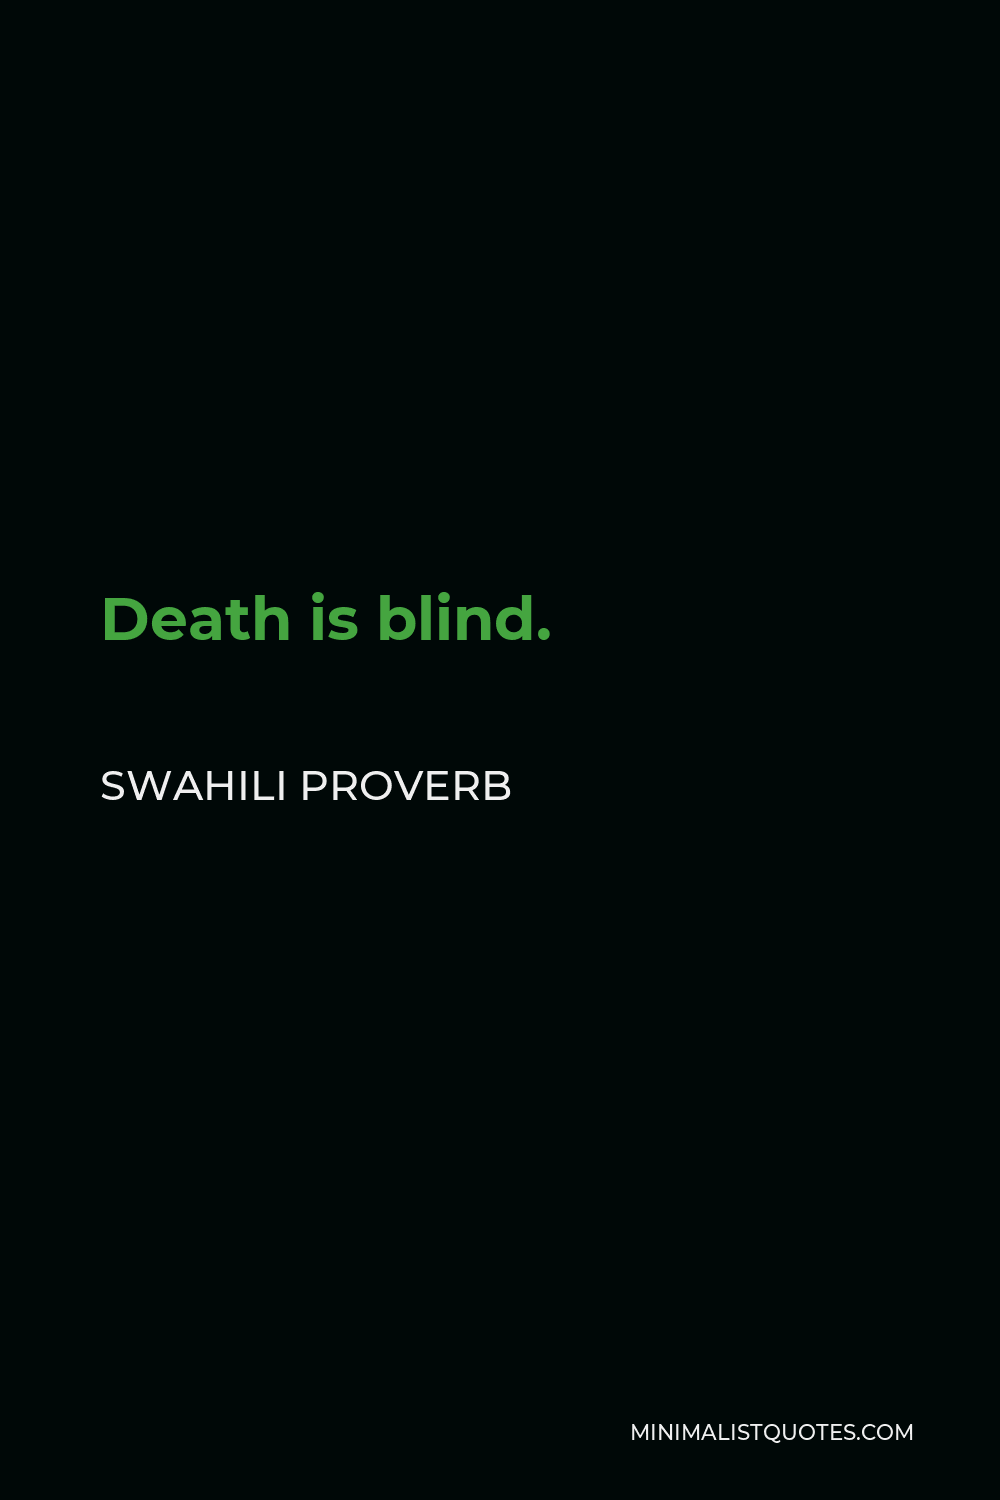 Swahili Proverb Quote - Death is blind.